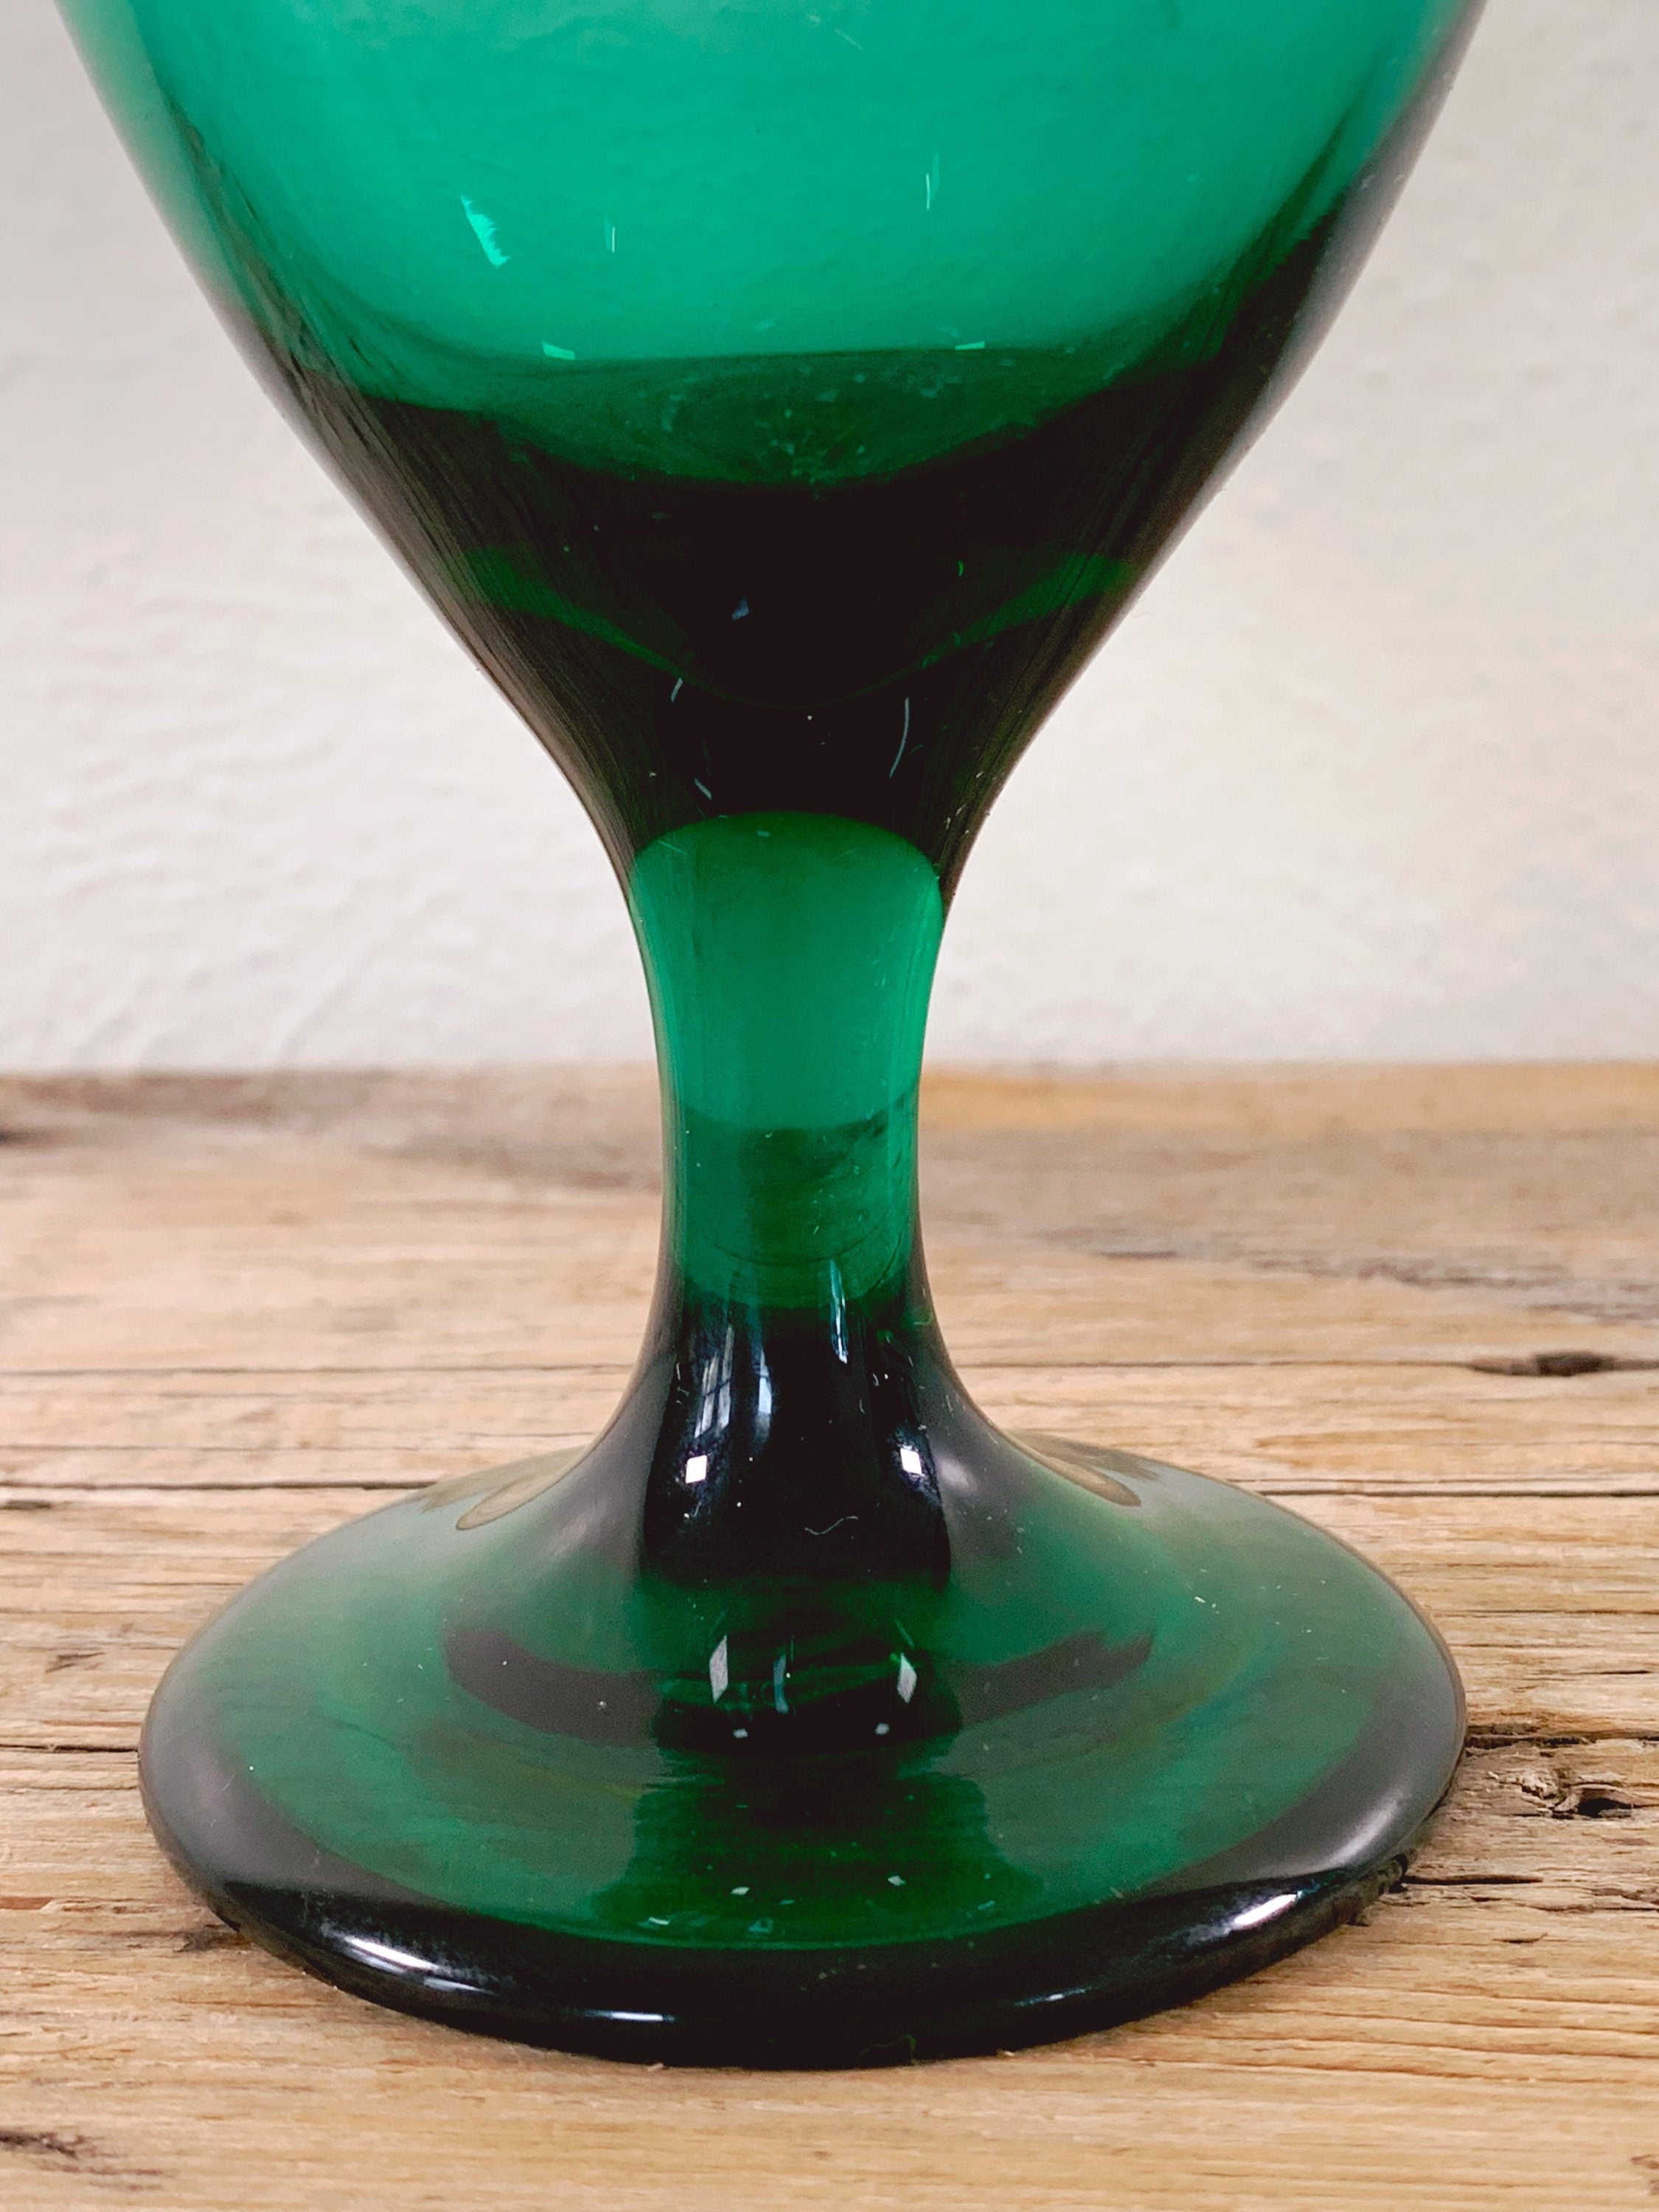 Vintage Pair of Large Green Glass Wine/water Glasses Goblets 